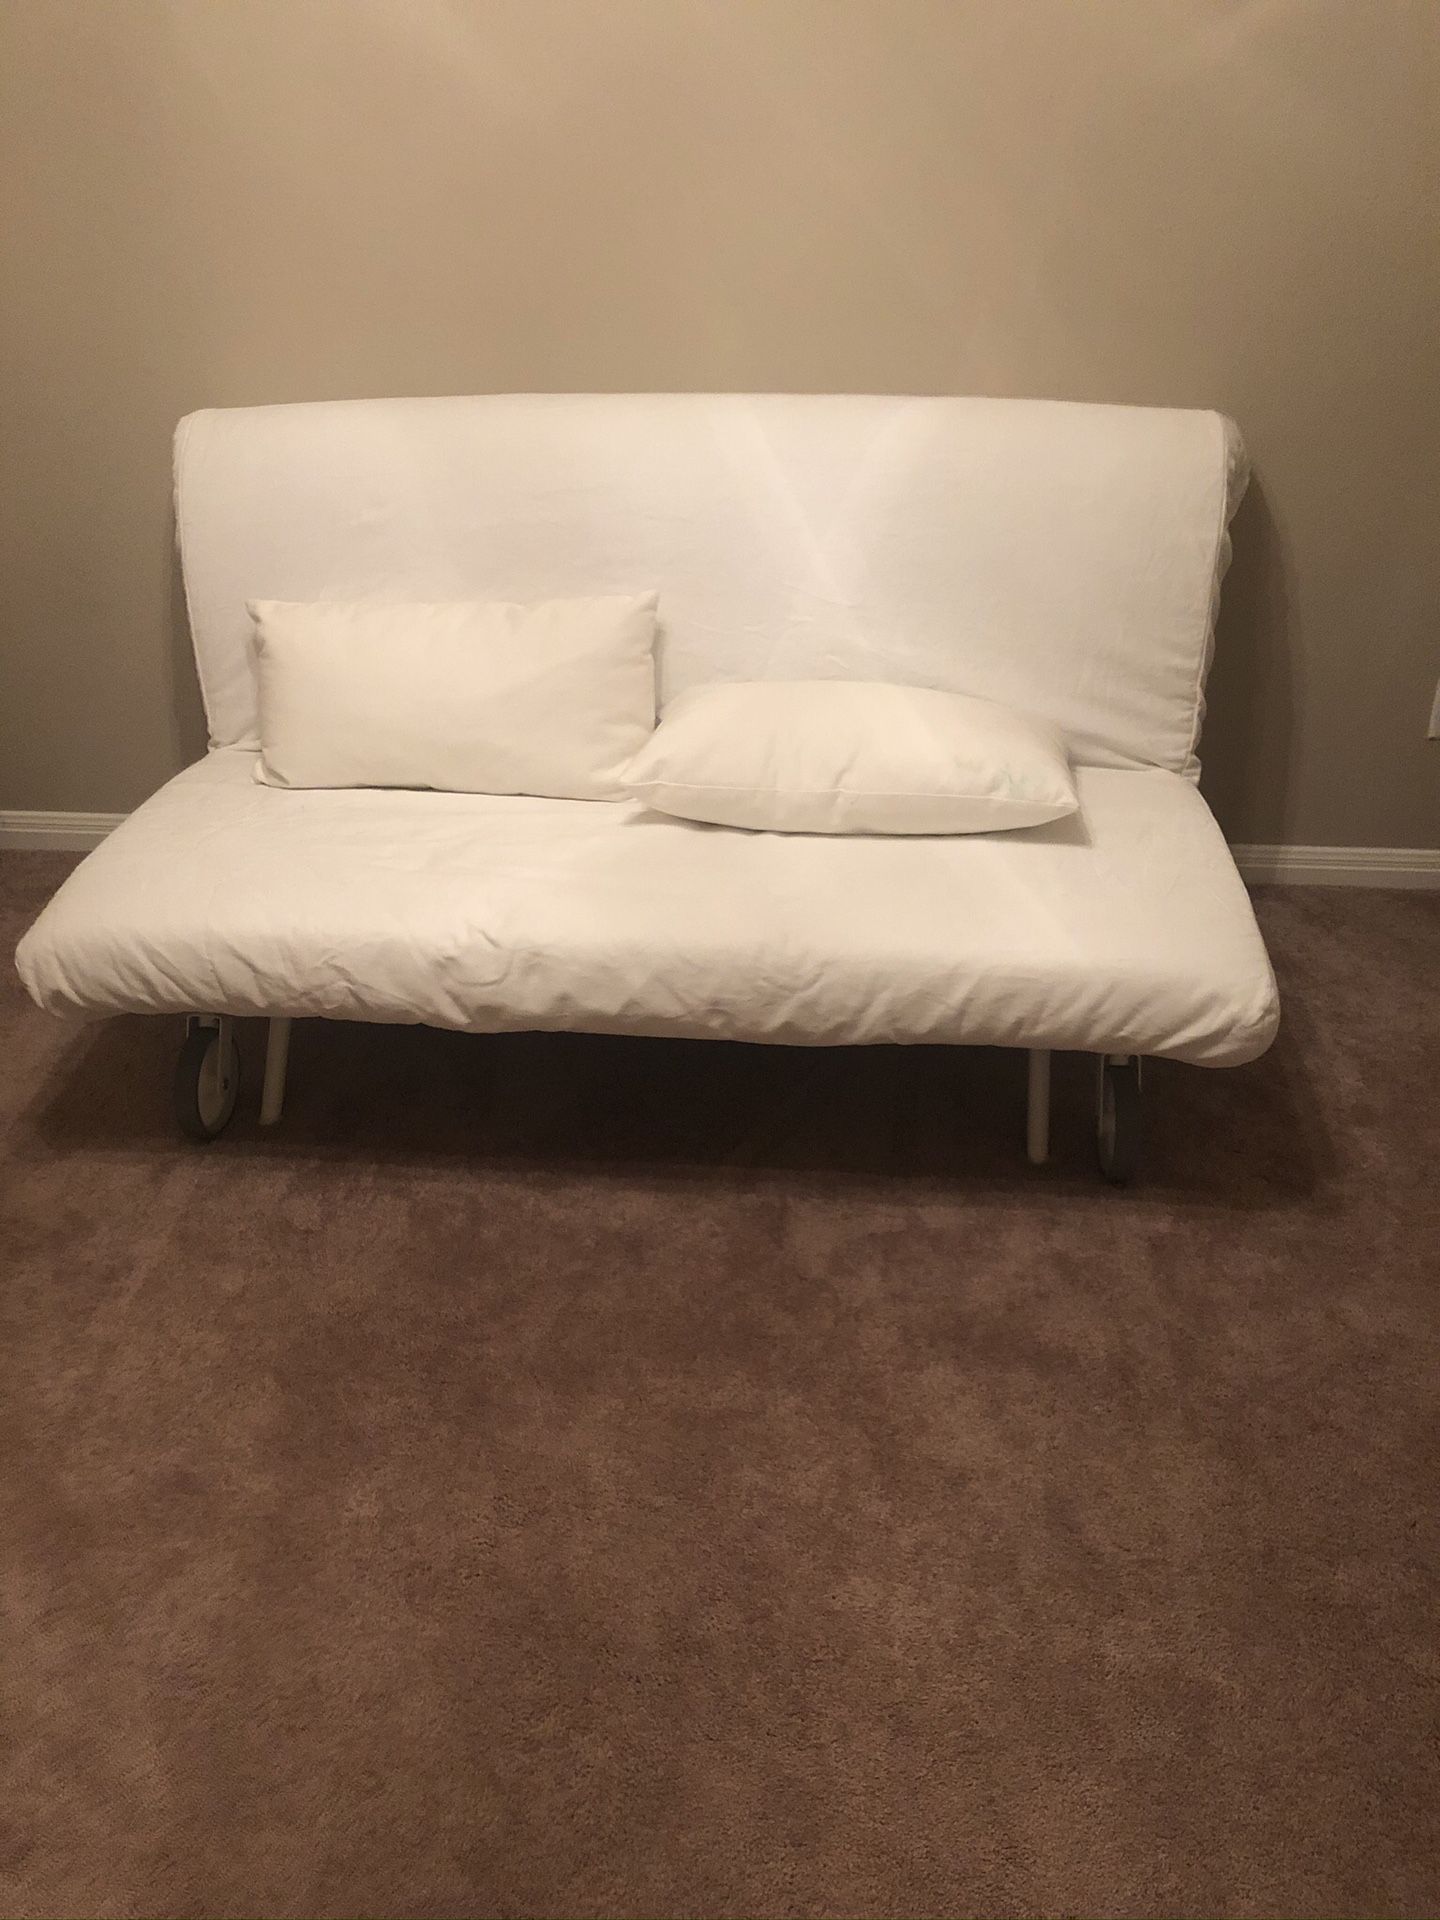 Queen sleeper sofa with cushions and pocket spring mattress pull out couch. Ikea Hyllie beige + cover